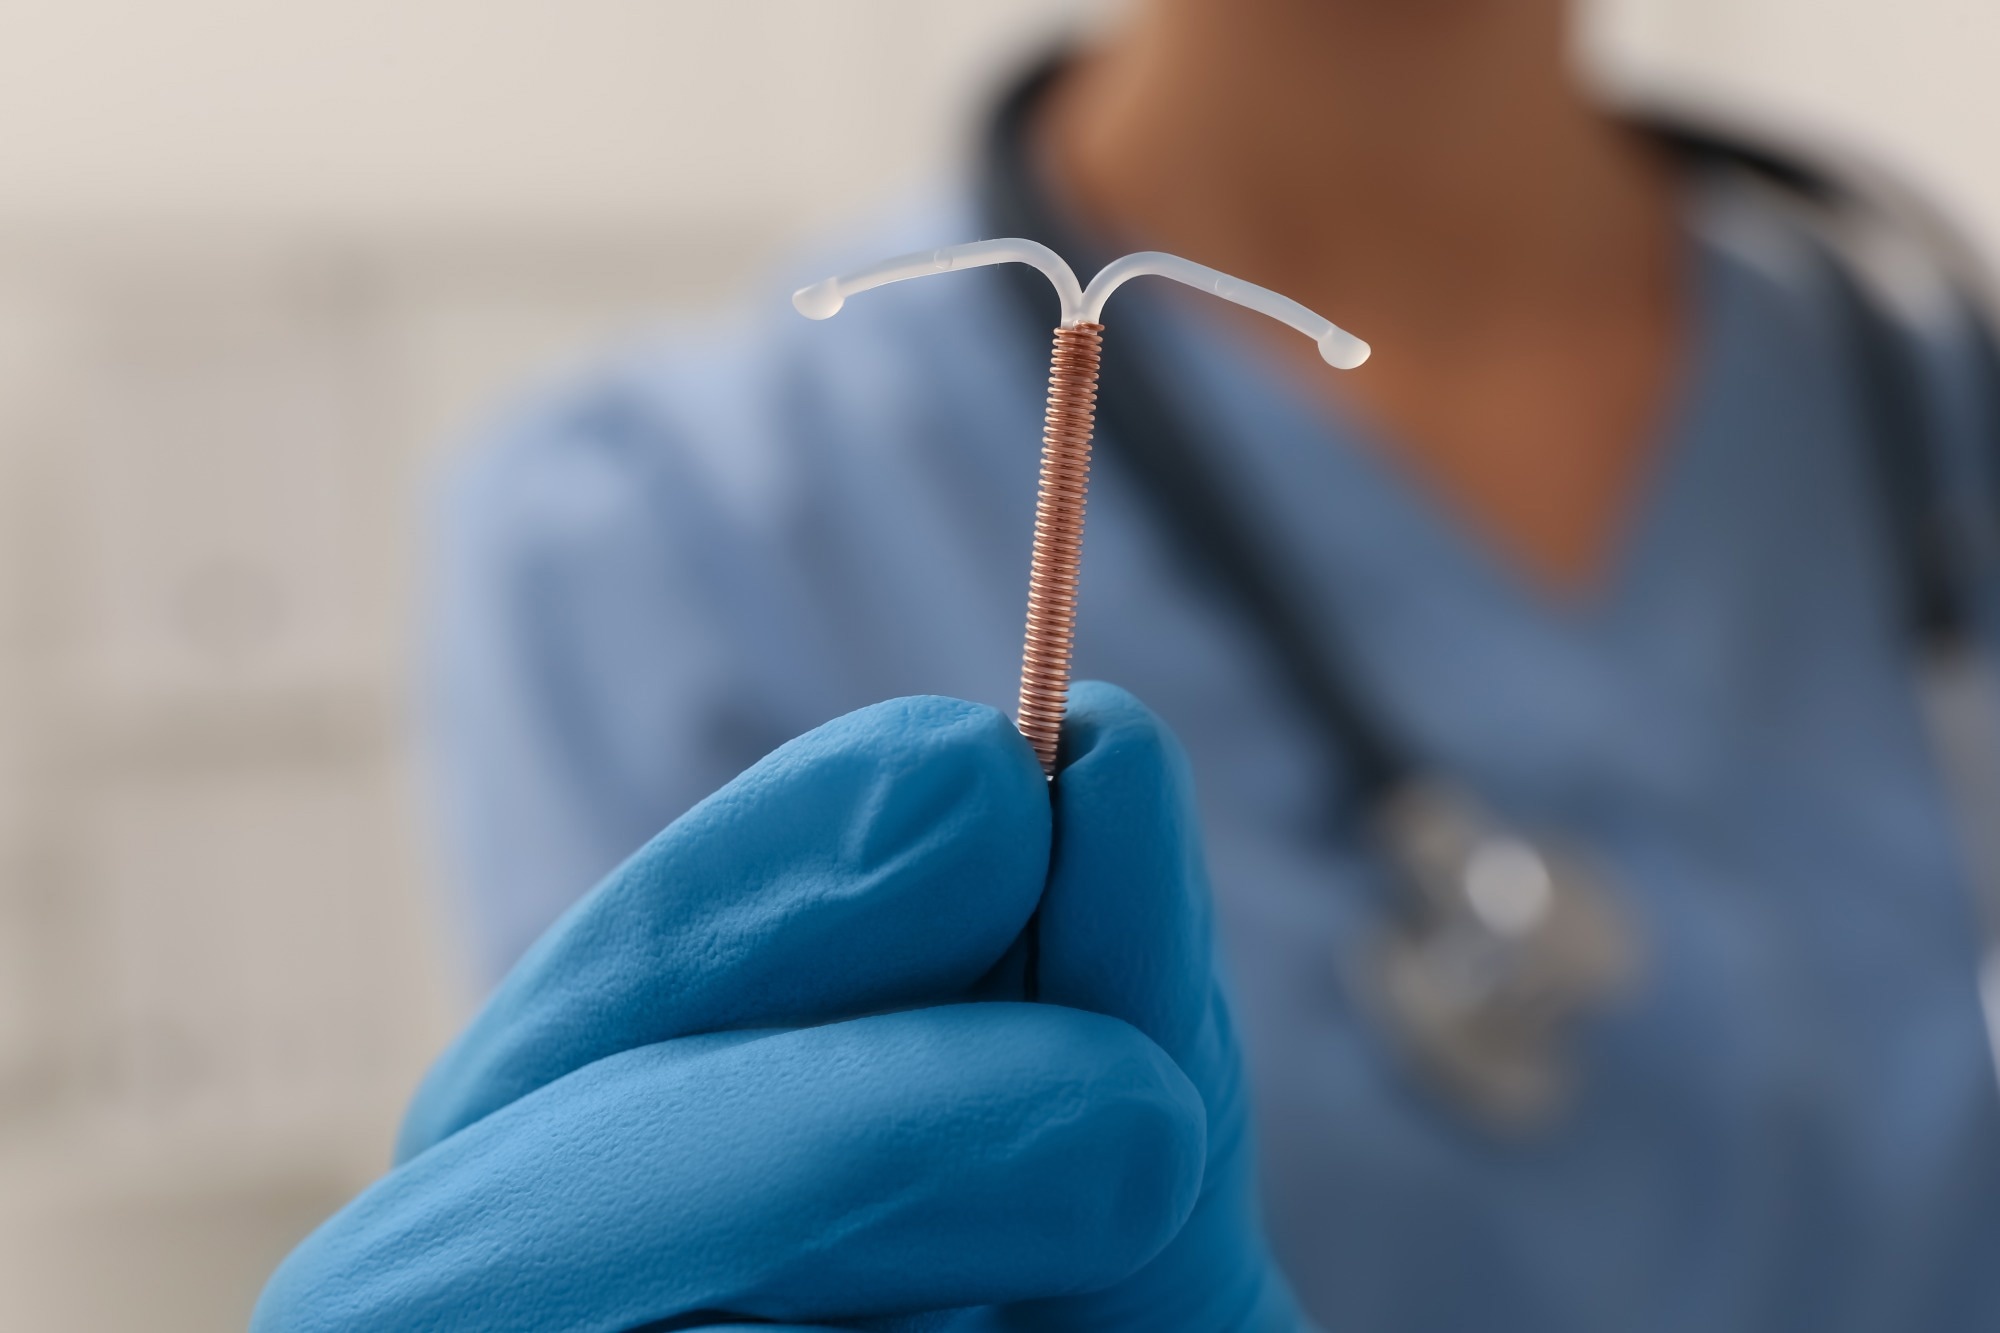 Study: What do women need to know about long-acting reversible contraception? Perspectives of women from culturally and linguistically diverse backgrounds. Image Credit: New Africa / Shutterstock